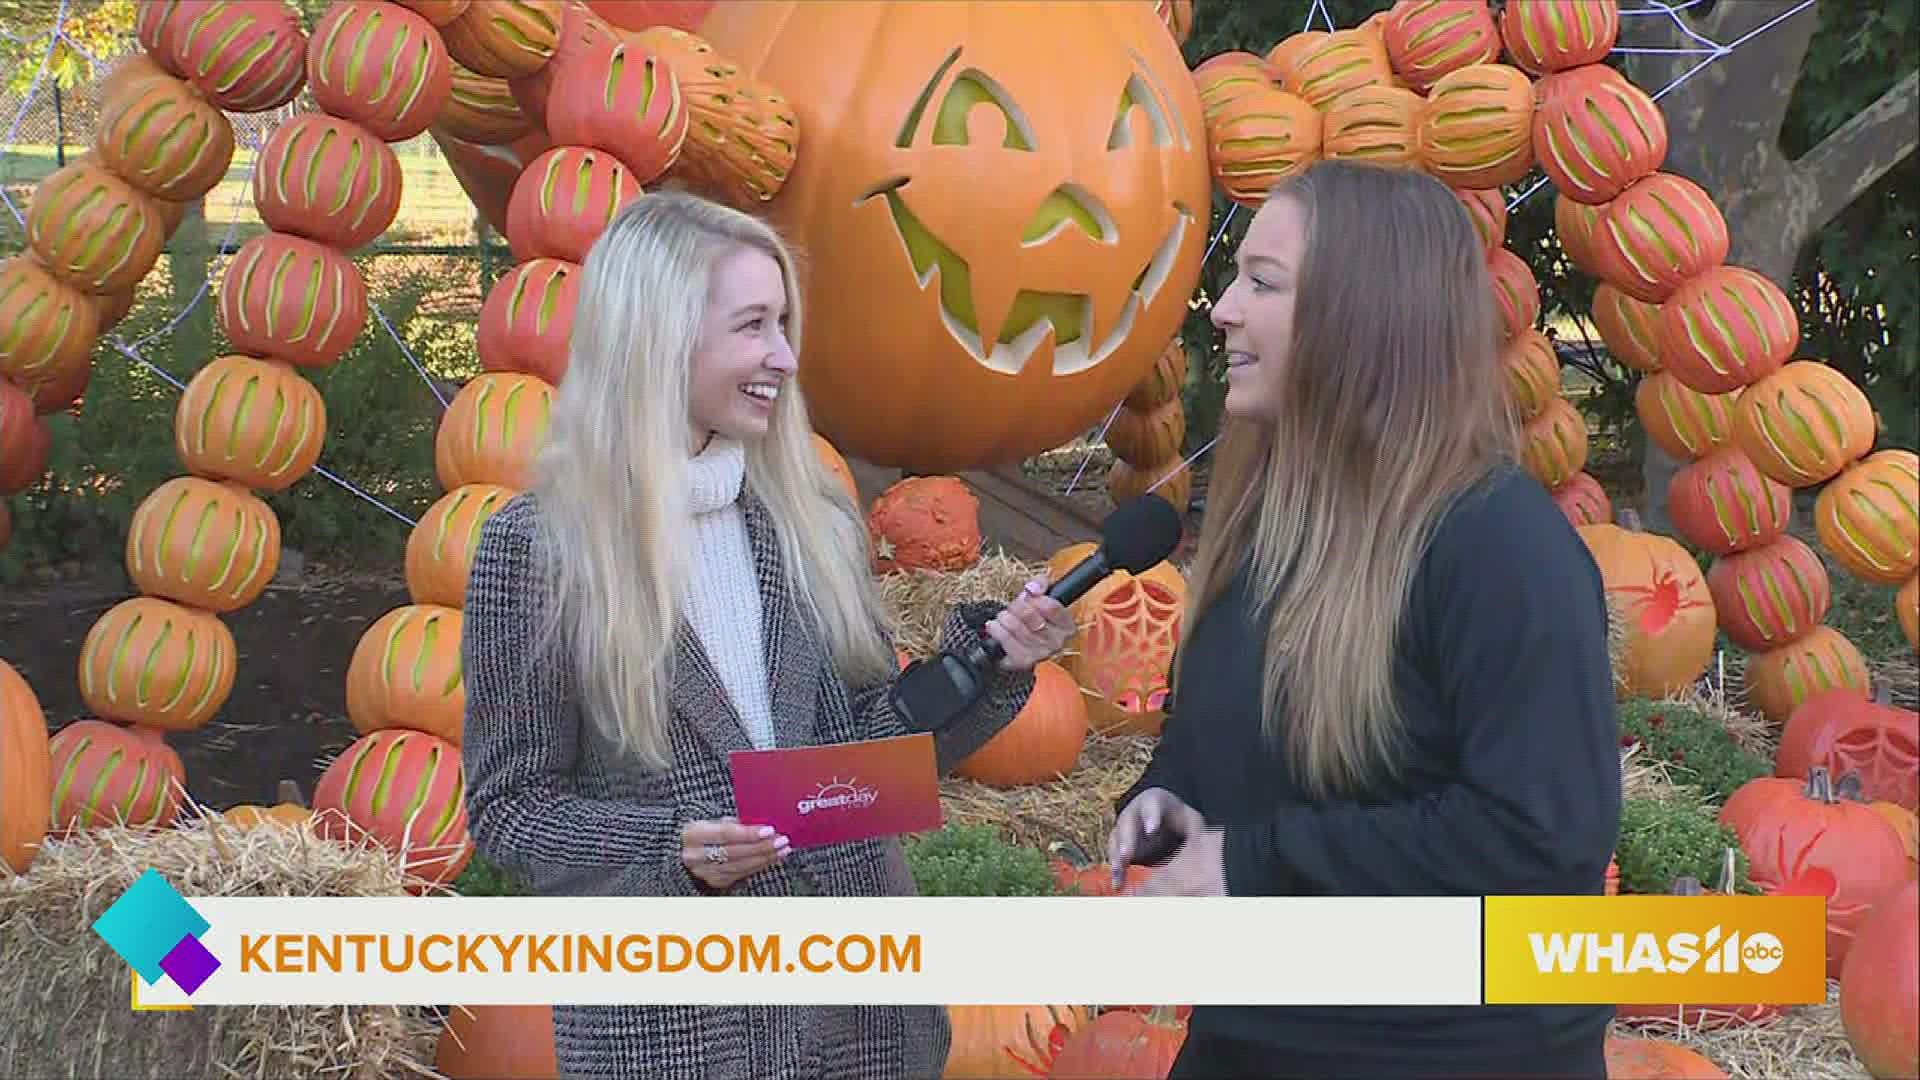 Lots of spooky activities happening at Kentucky Kingdom this October. GDL reporter Elle Bottom gives us a preview of Pumpkins at Kentucky Kingdom.